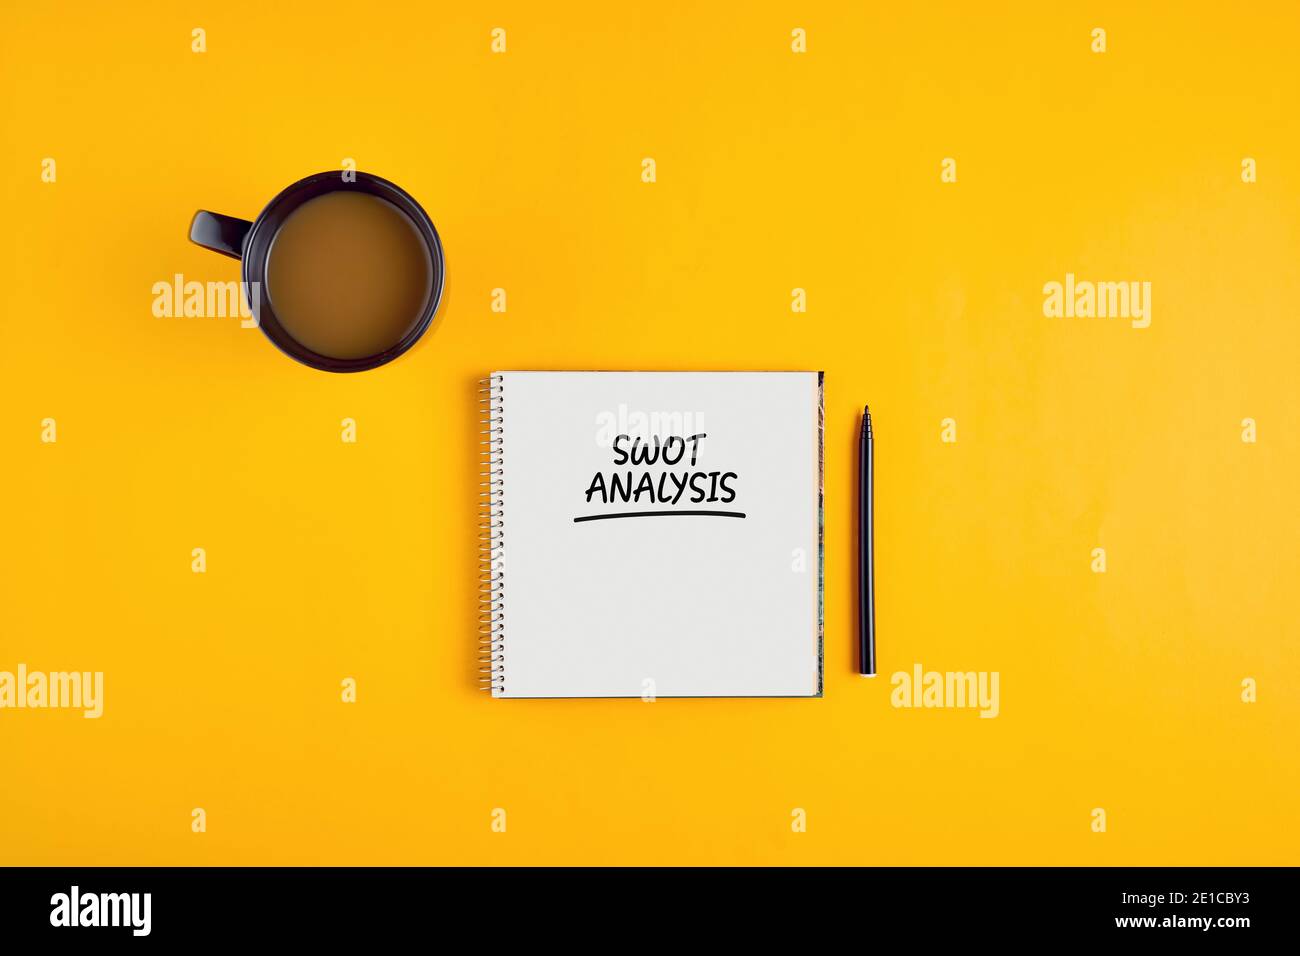 SWOT analysis written on notebook with pen and coffee mug on yellow background. Marketing strategy concept. Stock Photo